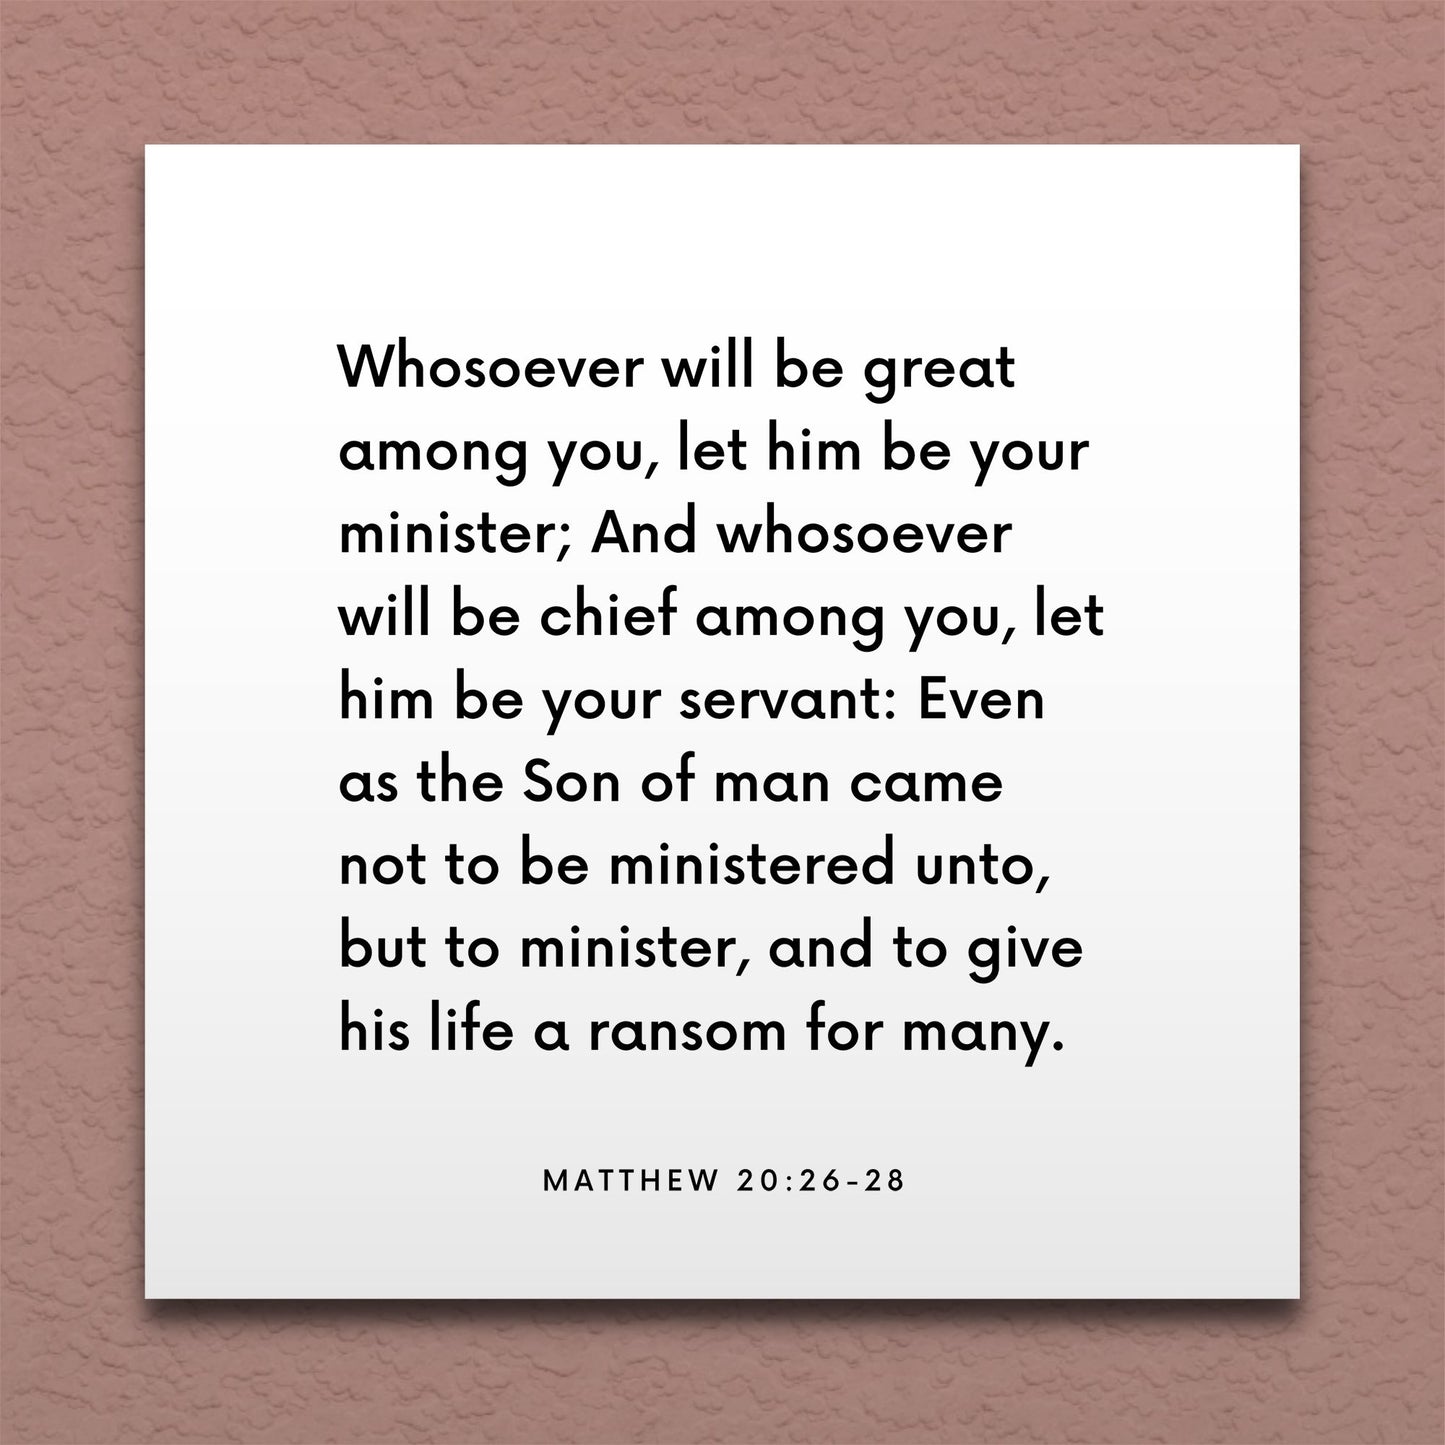 Wall-mounted scripture tile for Matthew 20:26-28 - "Whosoever will be great among you, let him be your minister"